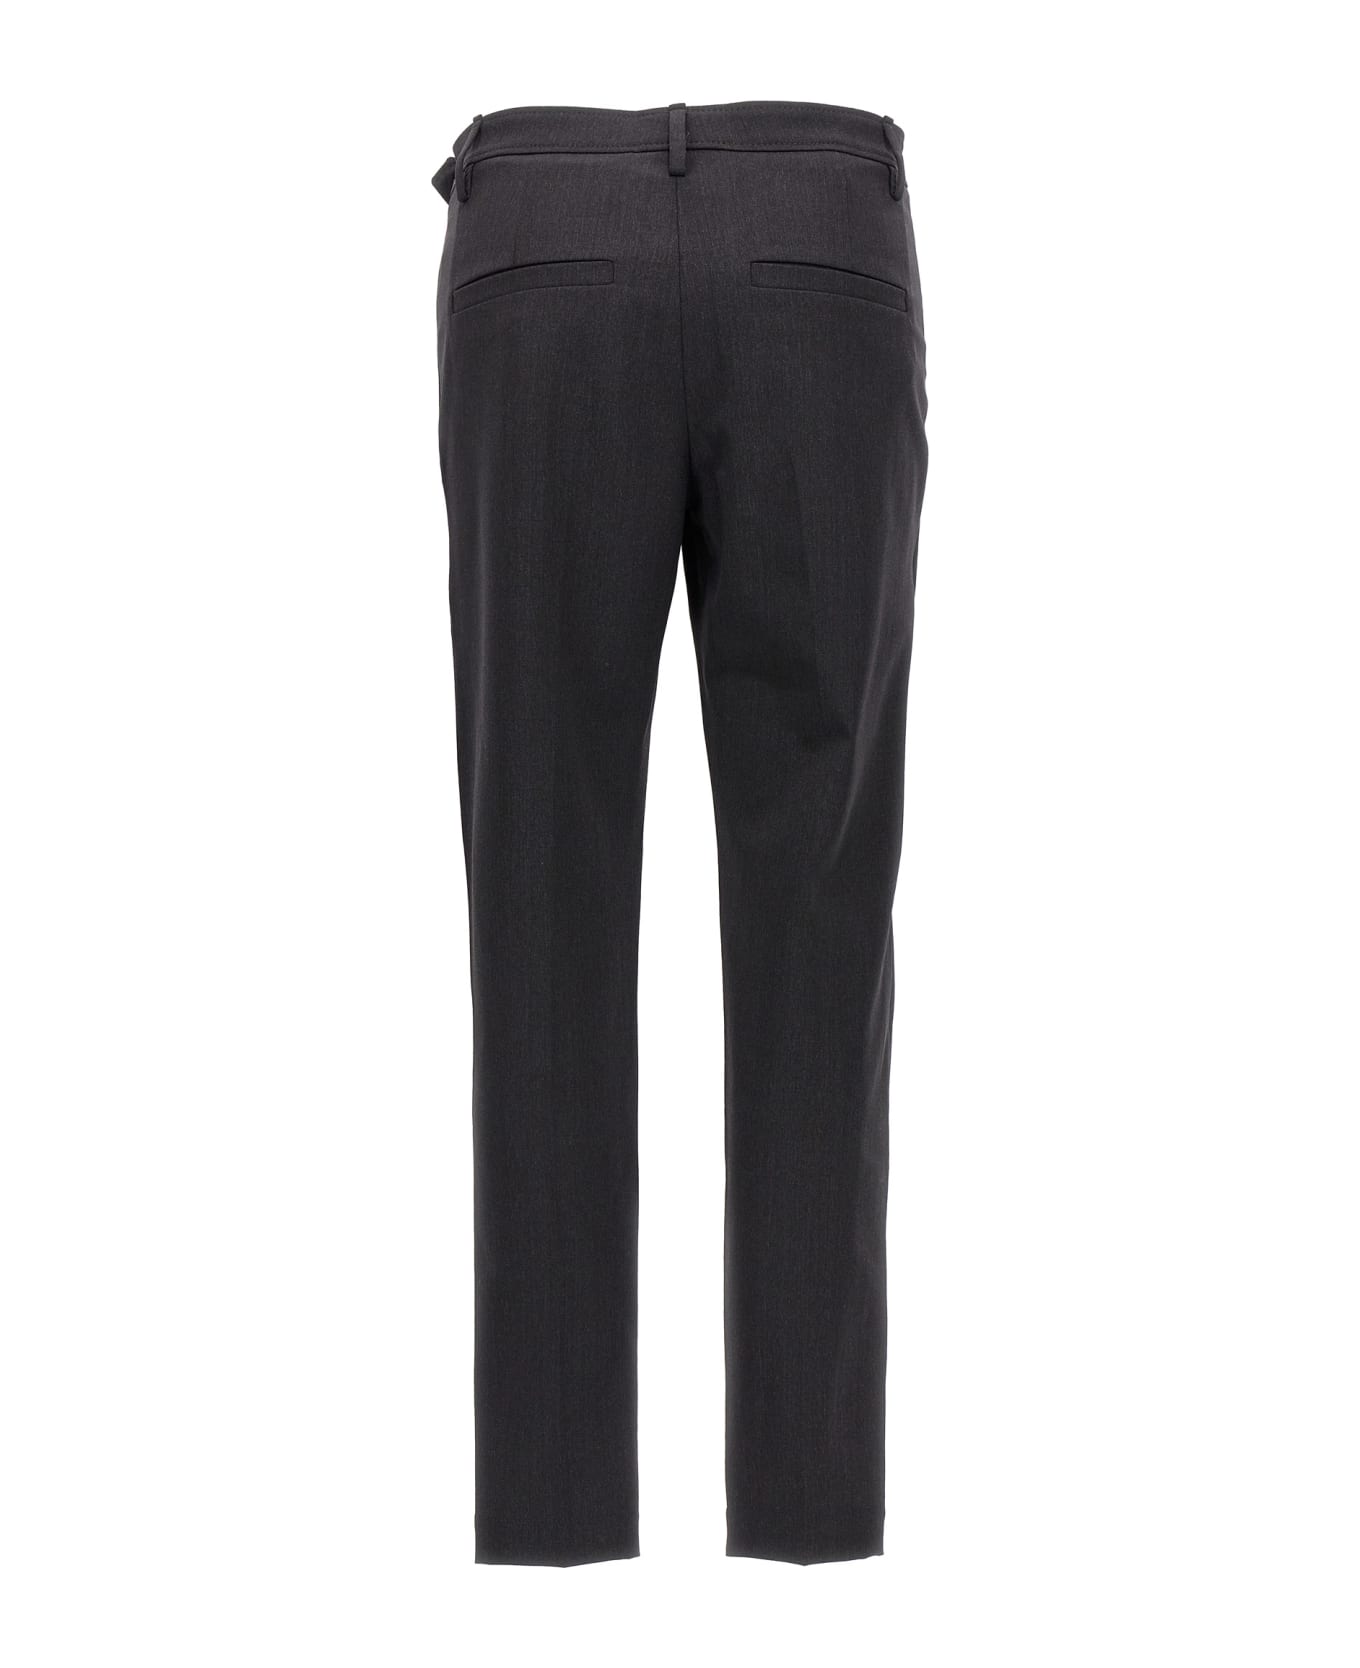 Brunello Cucinelli Stretch Cool Wool Trousers With Cigarette Cut - Gray ボトムス